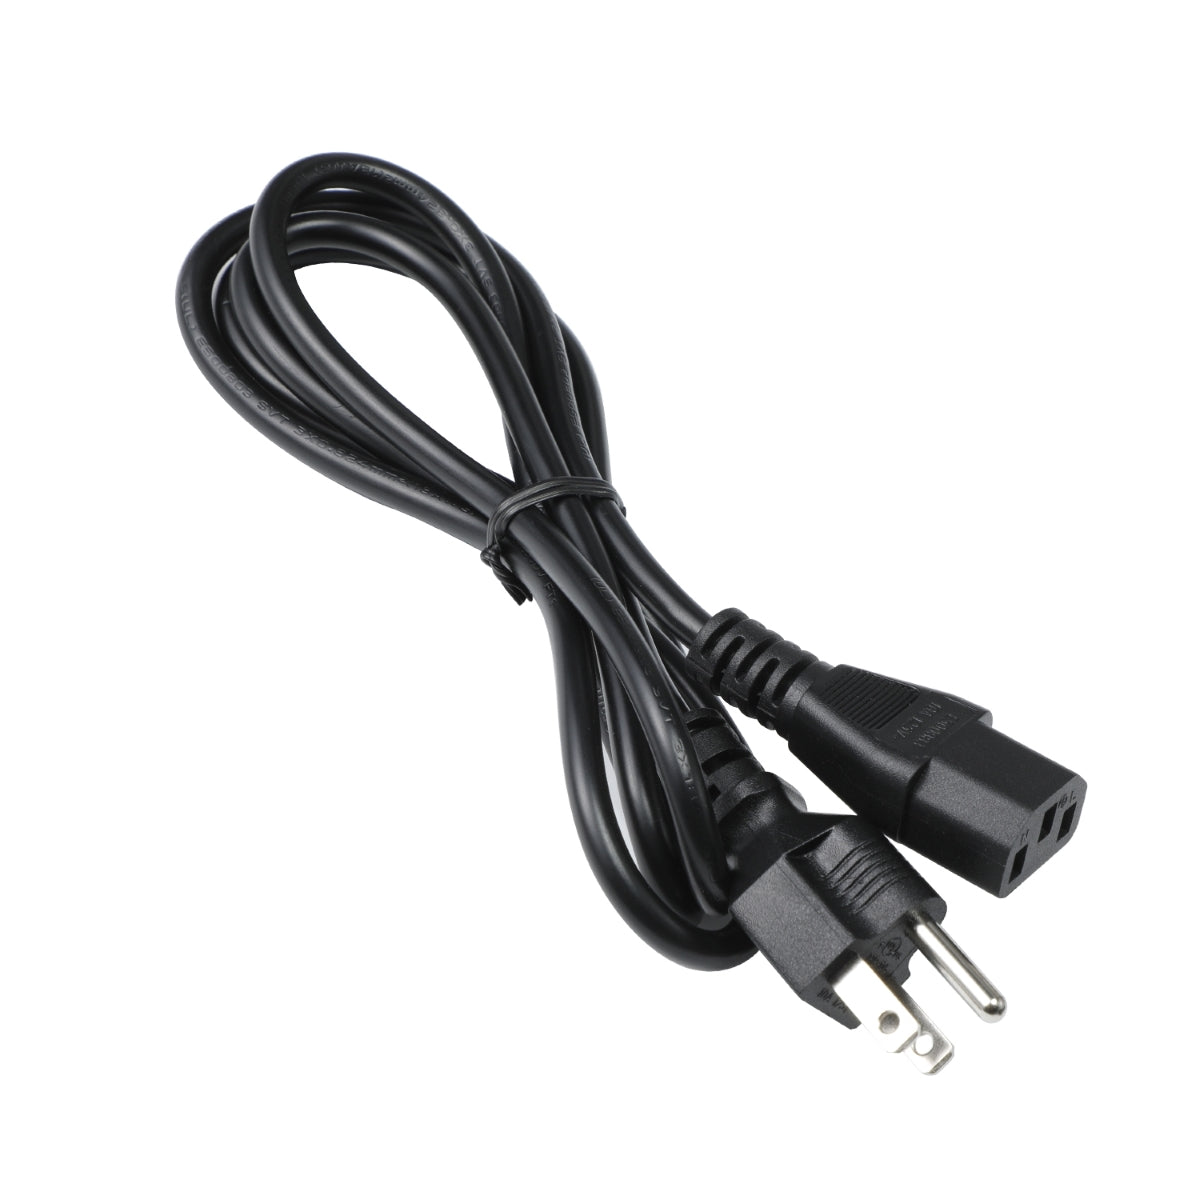 Power Cord for Dell S2722DGM Monitor